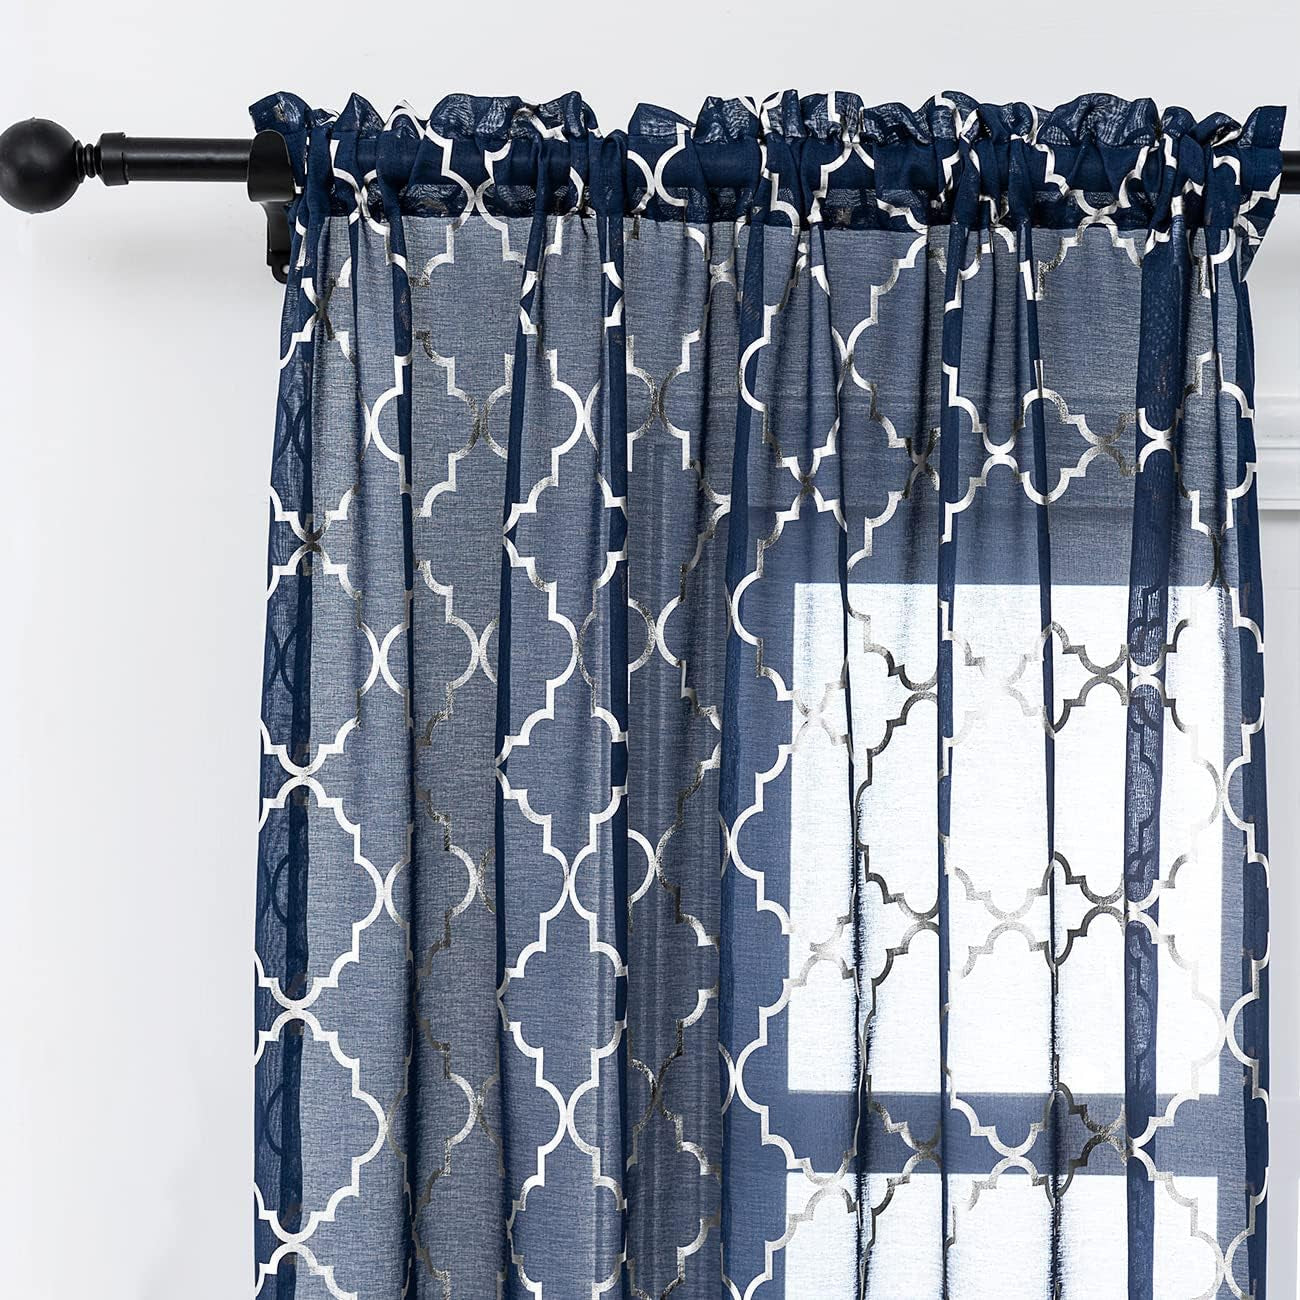 Kotile Silver Grey Sheer Curtains 96 Inch - Metallic Silver Foil Moroccan Tile Printed Rod Pocket Privacy Light Filtering Curtains for Living Room, 52 X 96 Inches, 2 Panels, Grey and Silver  Kotile Textile .Navy And Silver W52" X L84" 